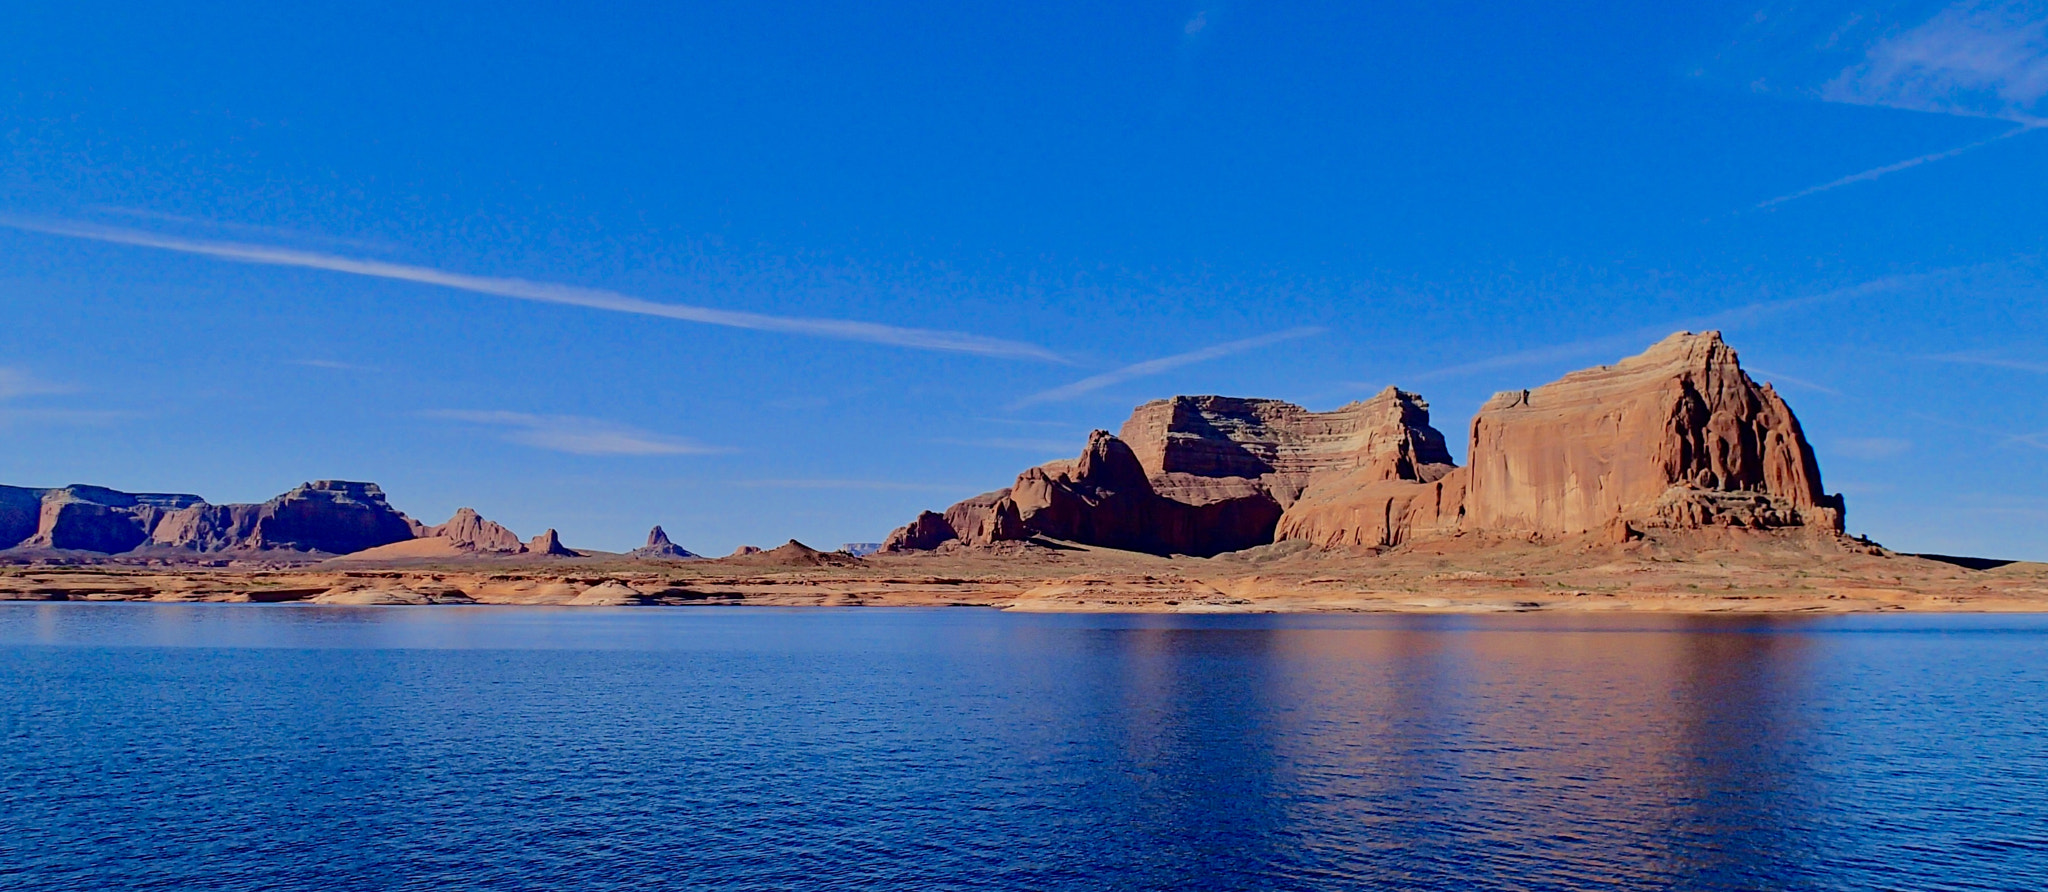 Olympus TG-2 sample photo. Early morning on lake powell photography